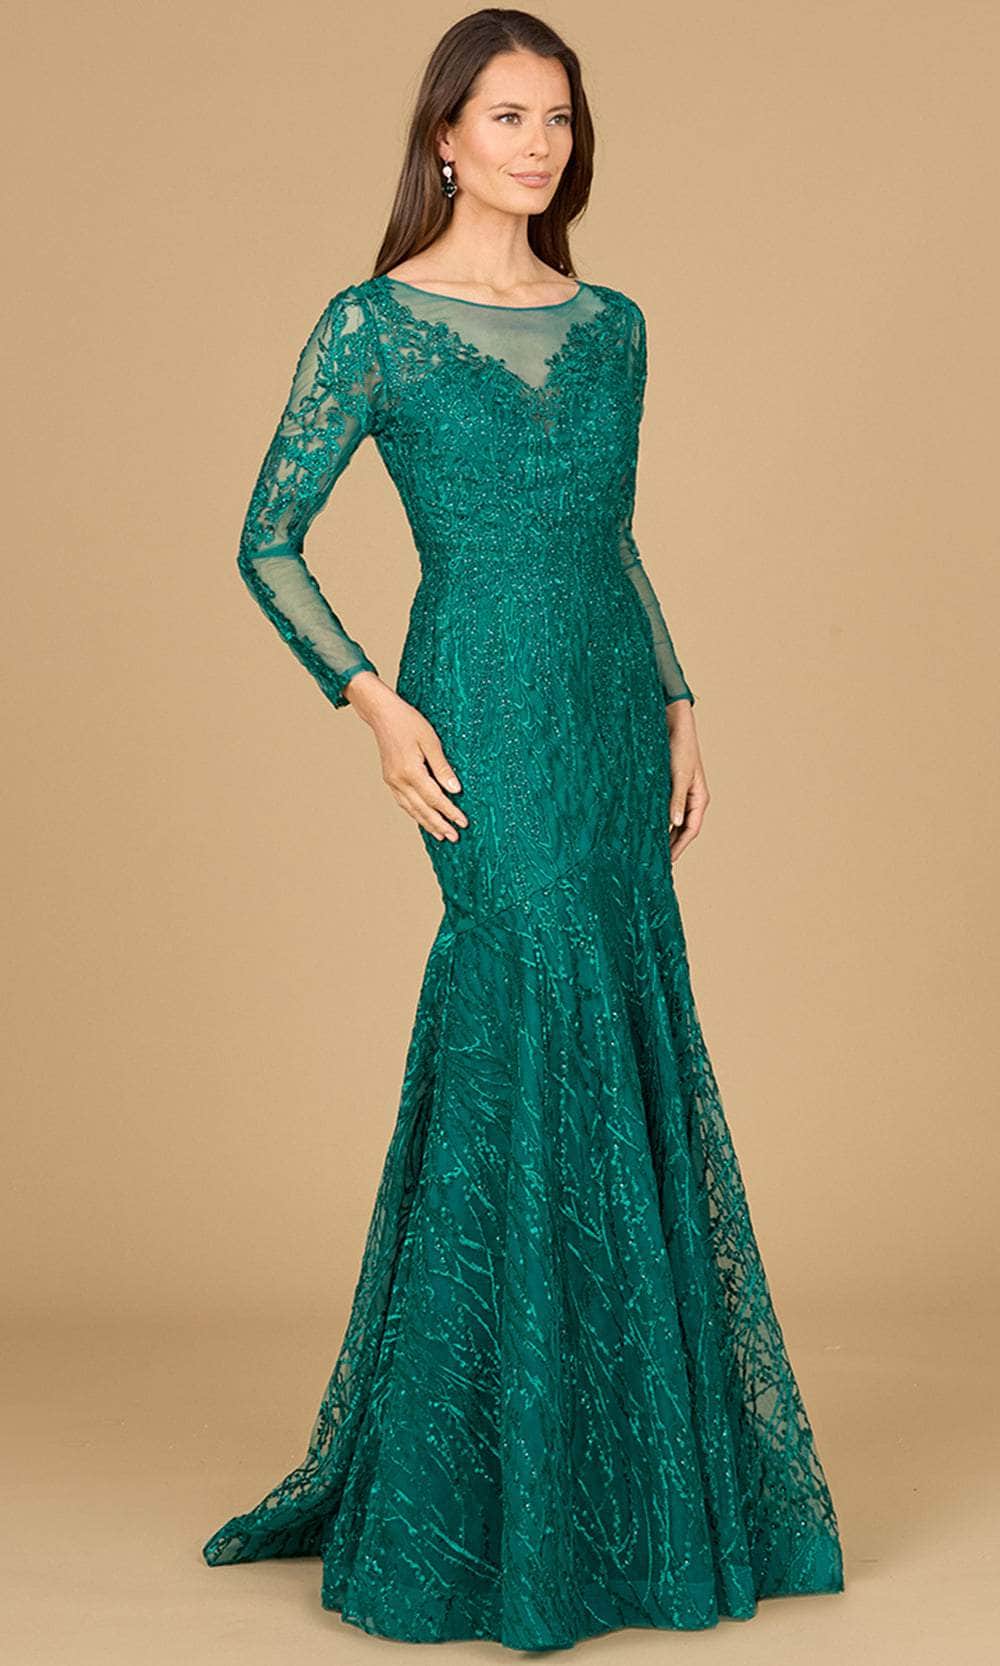 Image of Lara Dresses 29131 - Long Sleeve Applique Evening Gown